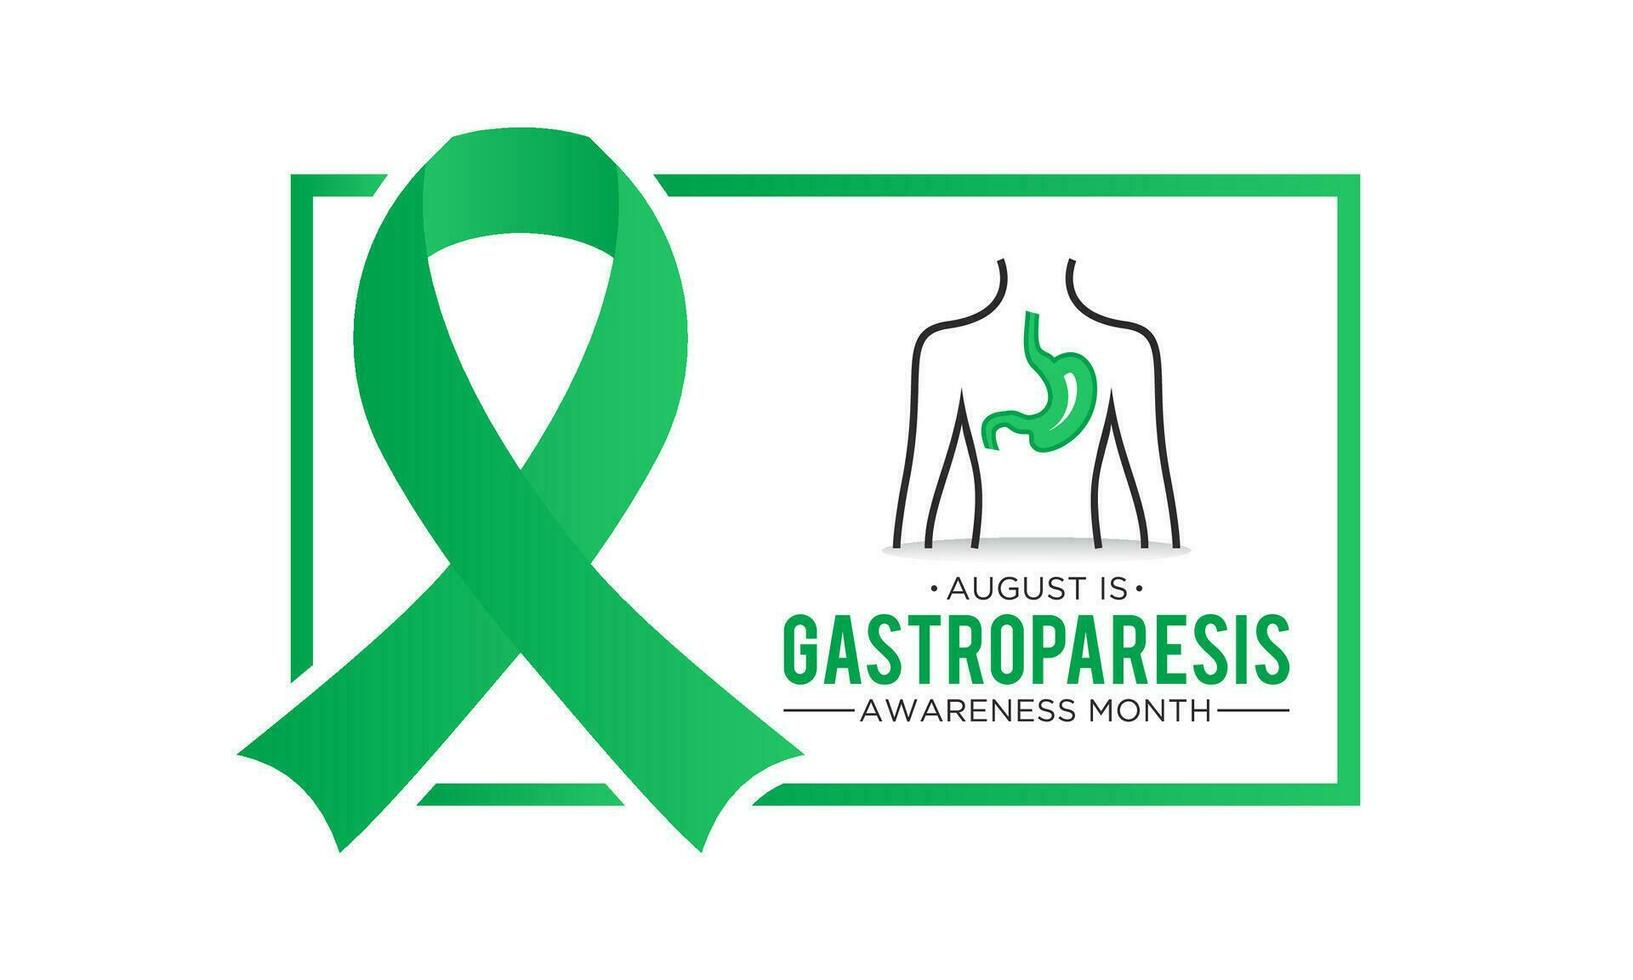 Gastroparesis awareness month is observed every year in august. August is gastroparesis awareness month. Vector template for banner, greeting card, poster with background. Vector illustration.